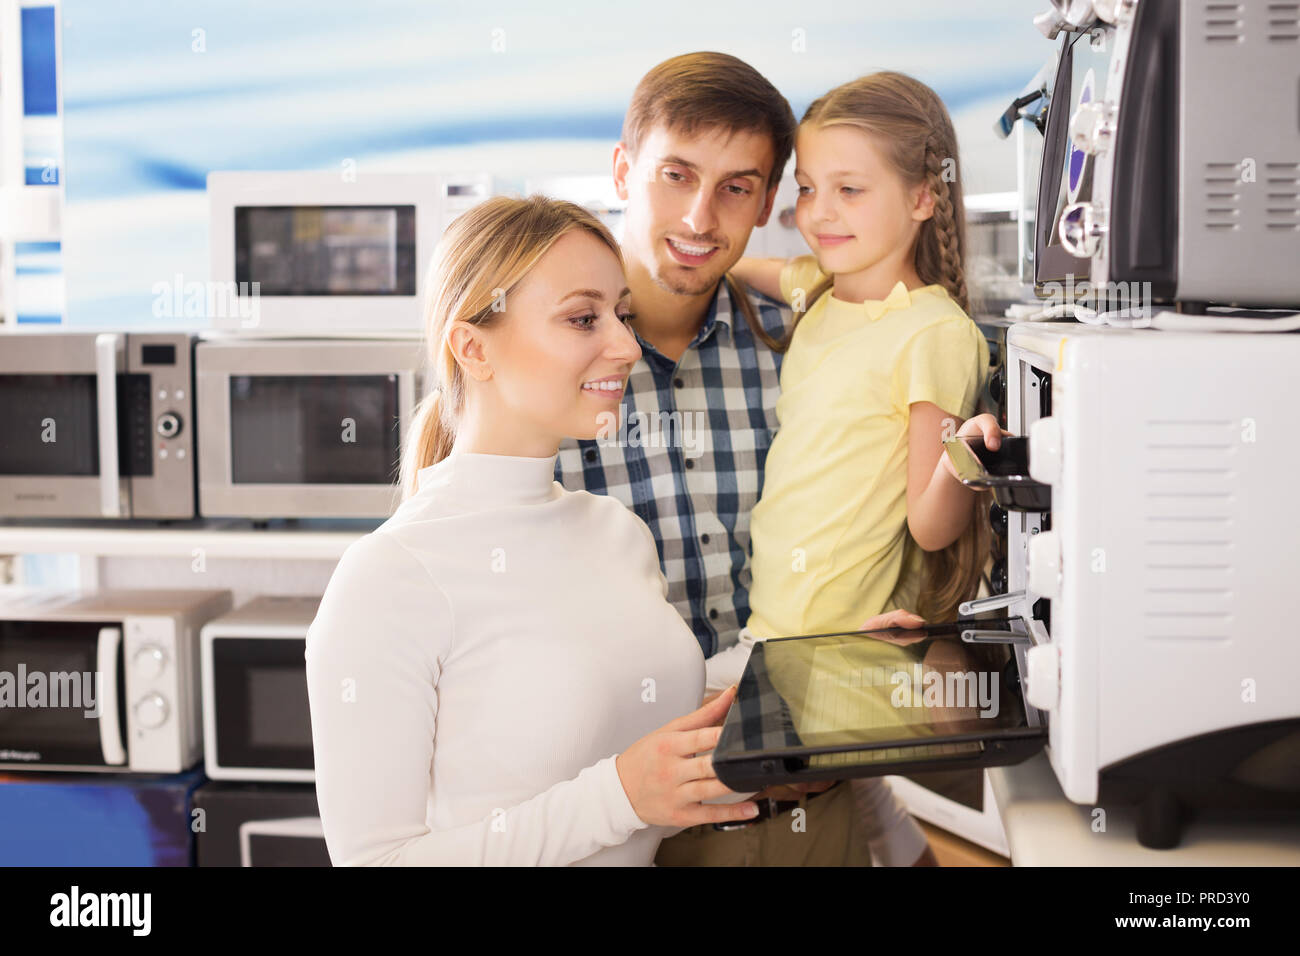 Smiling young man and woman with girl buying modern microwave in store with electronics Stock Photo